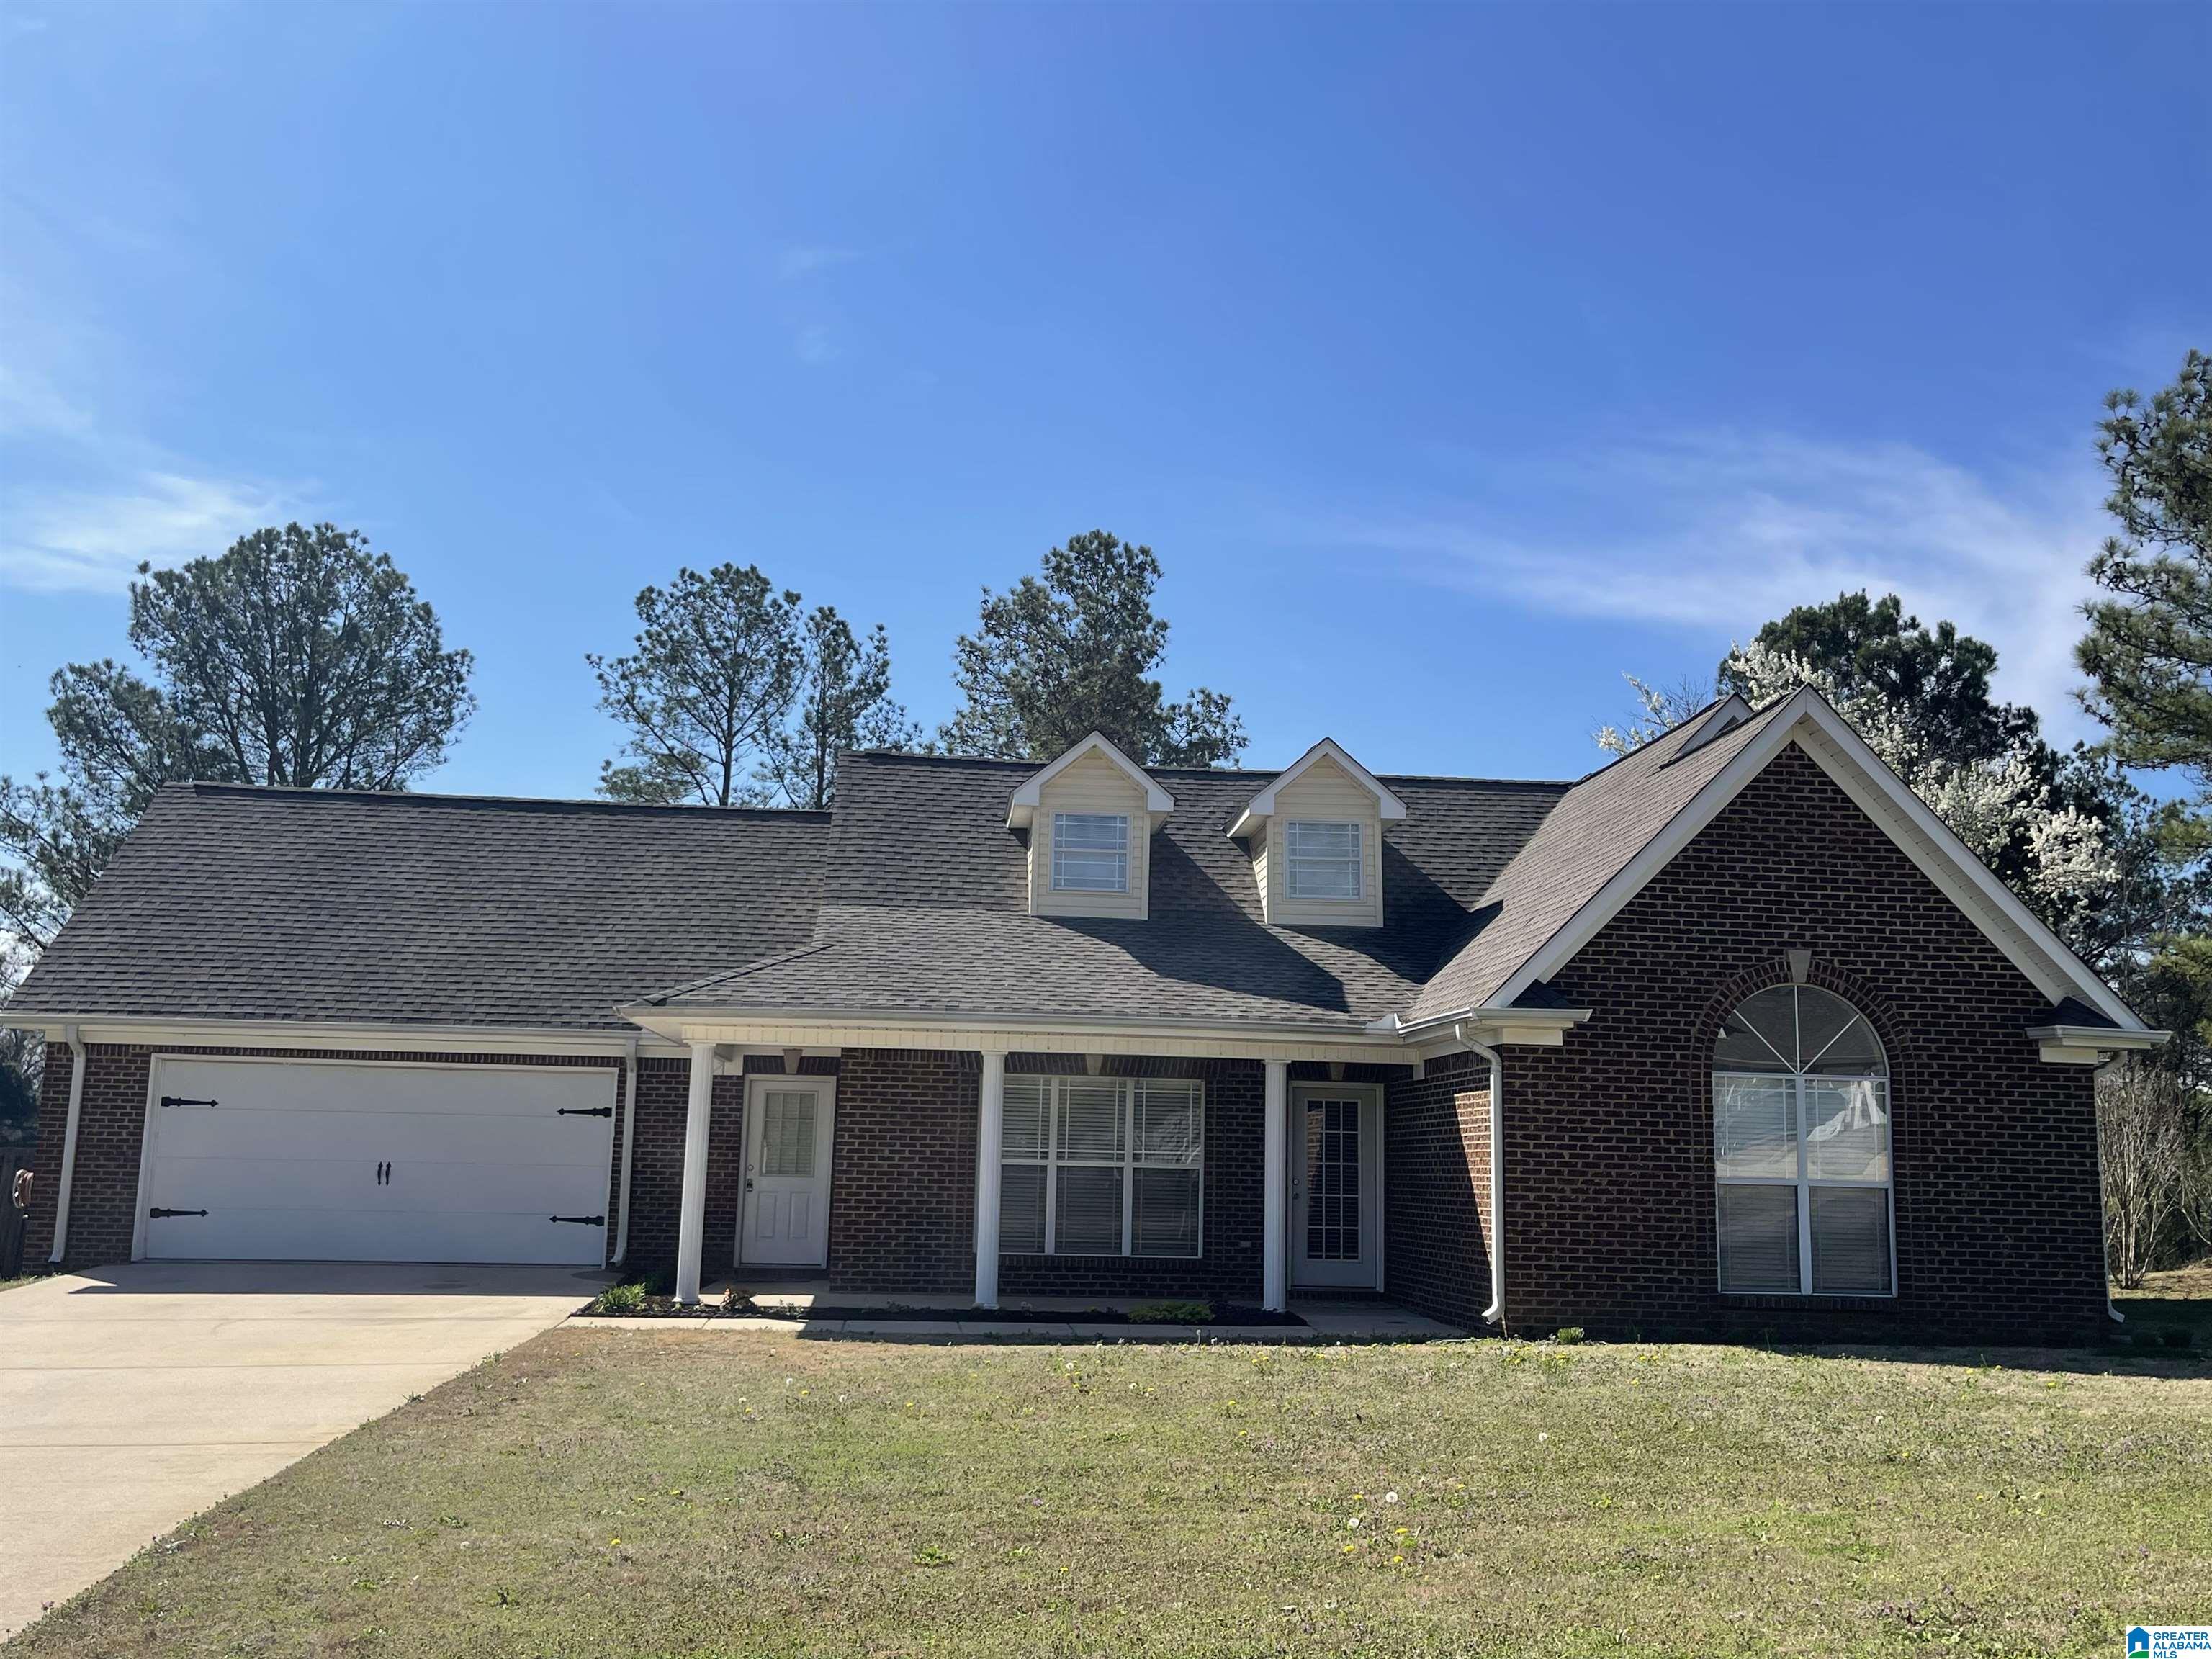 235 COUNTY ROAD 70, THORSBY, AL 35171